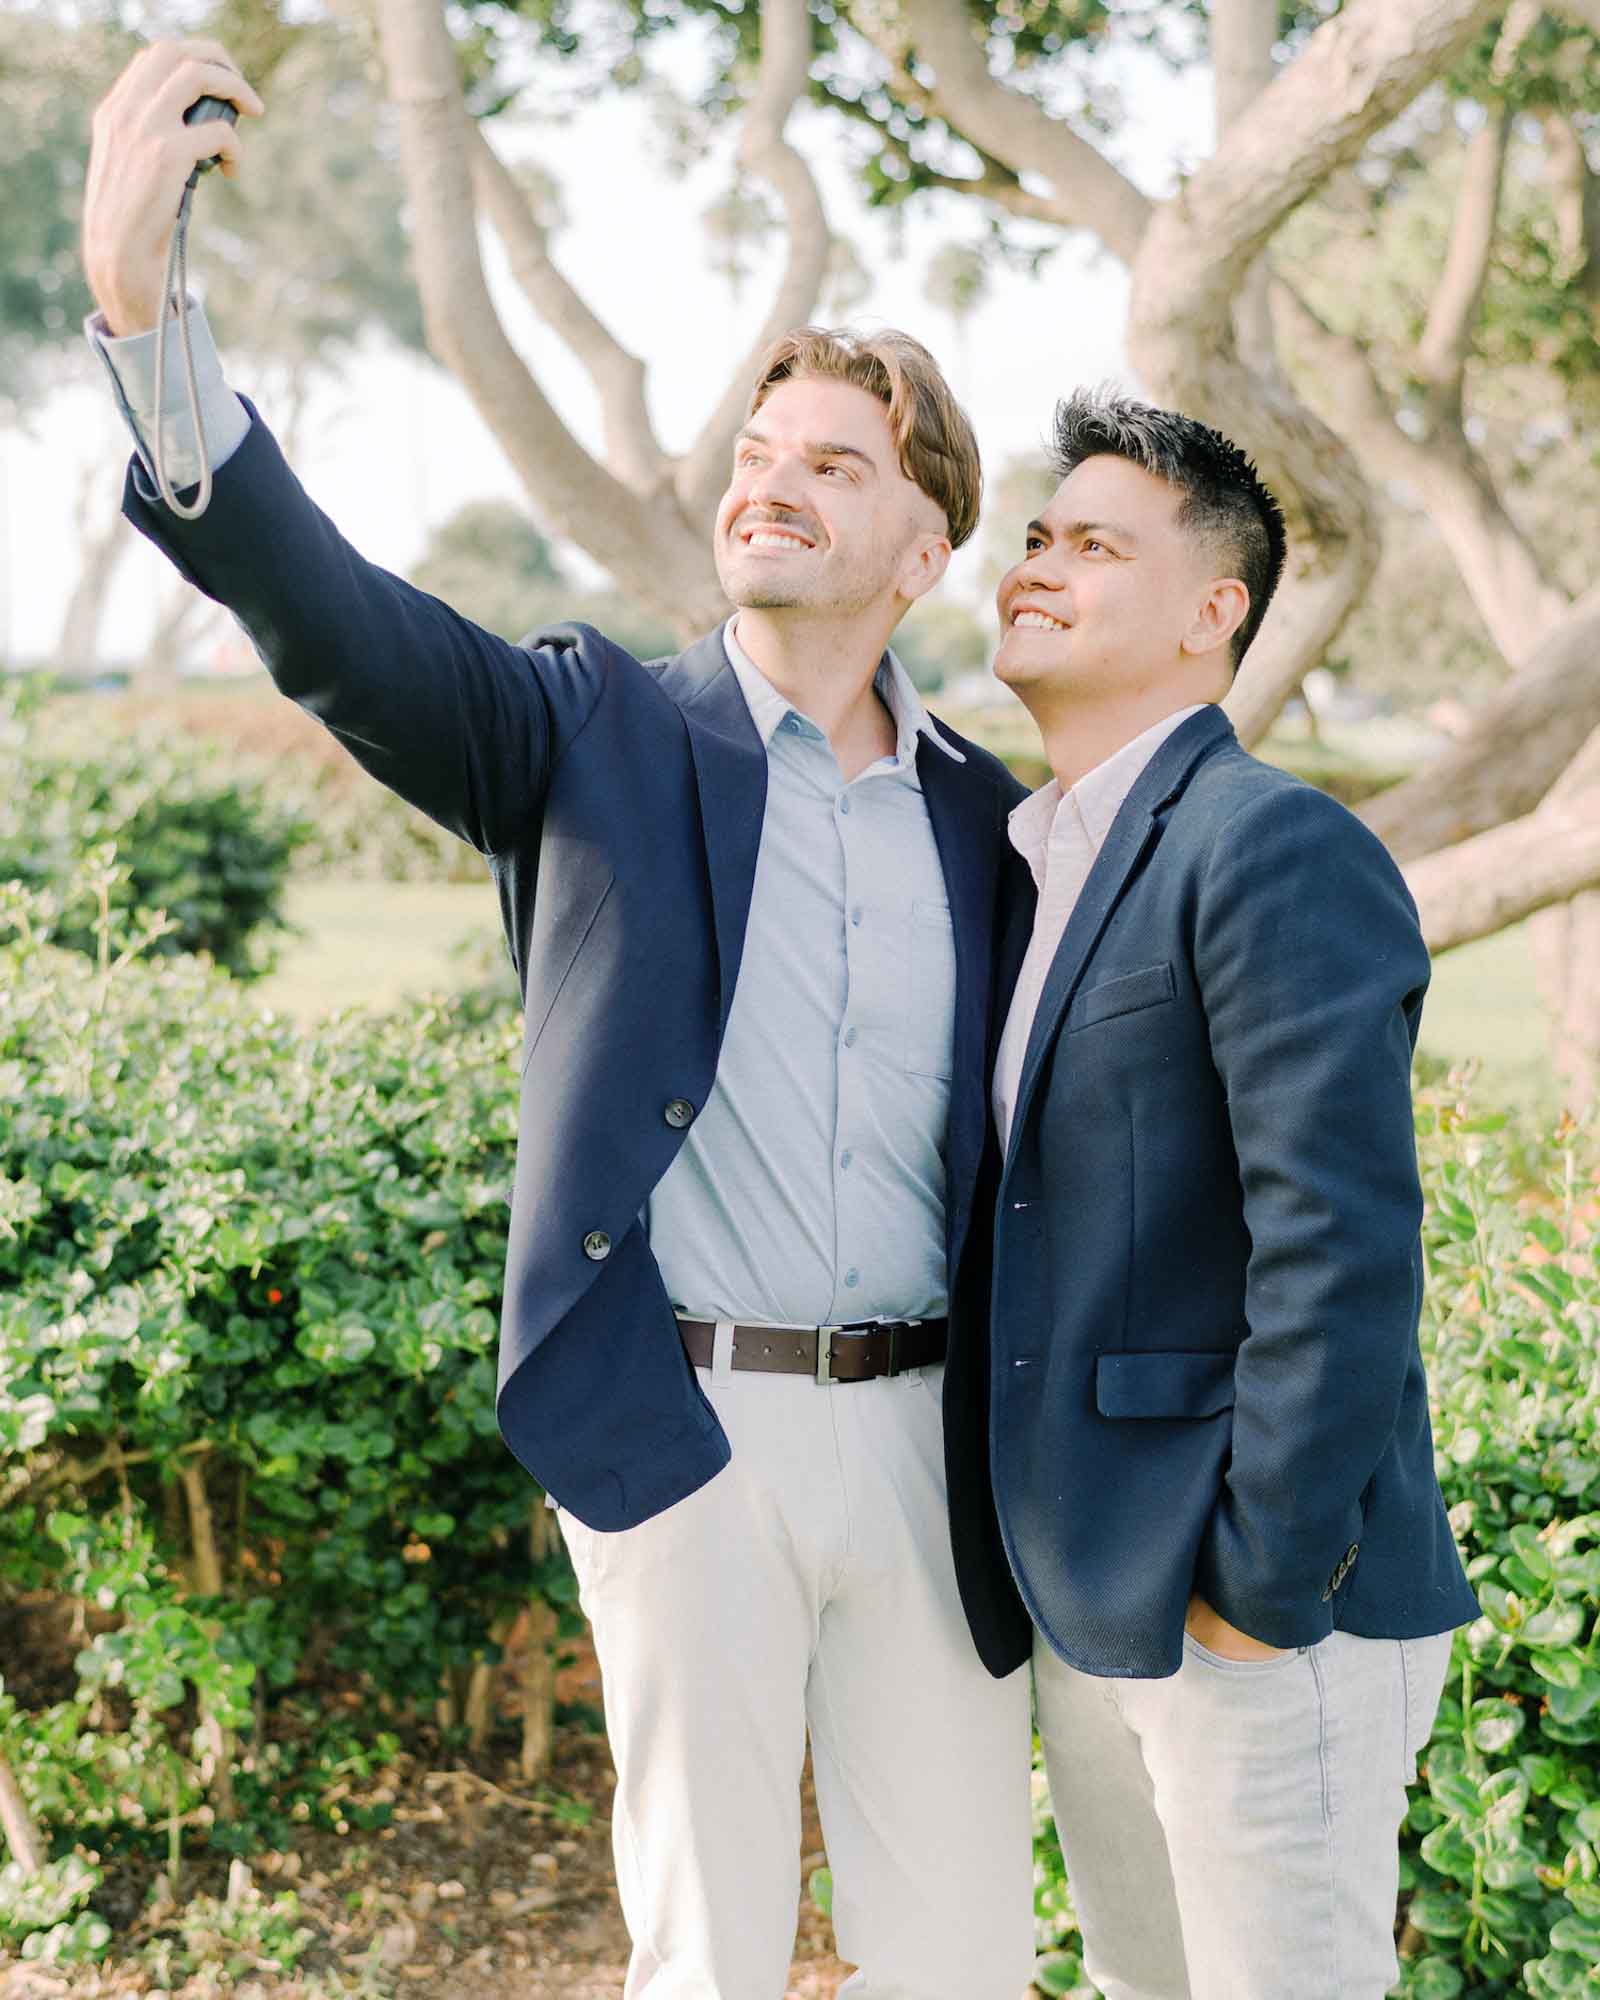 Couple recreates their first date in touching engagement session | Robert Michael Films | Featured on Equally Wed, the leading LGBTQ+ wedding magazine